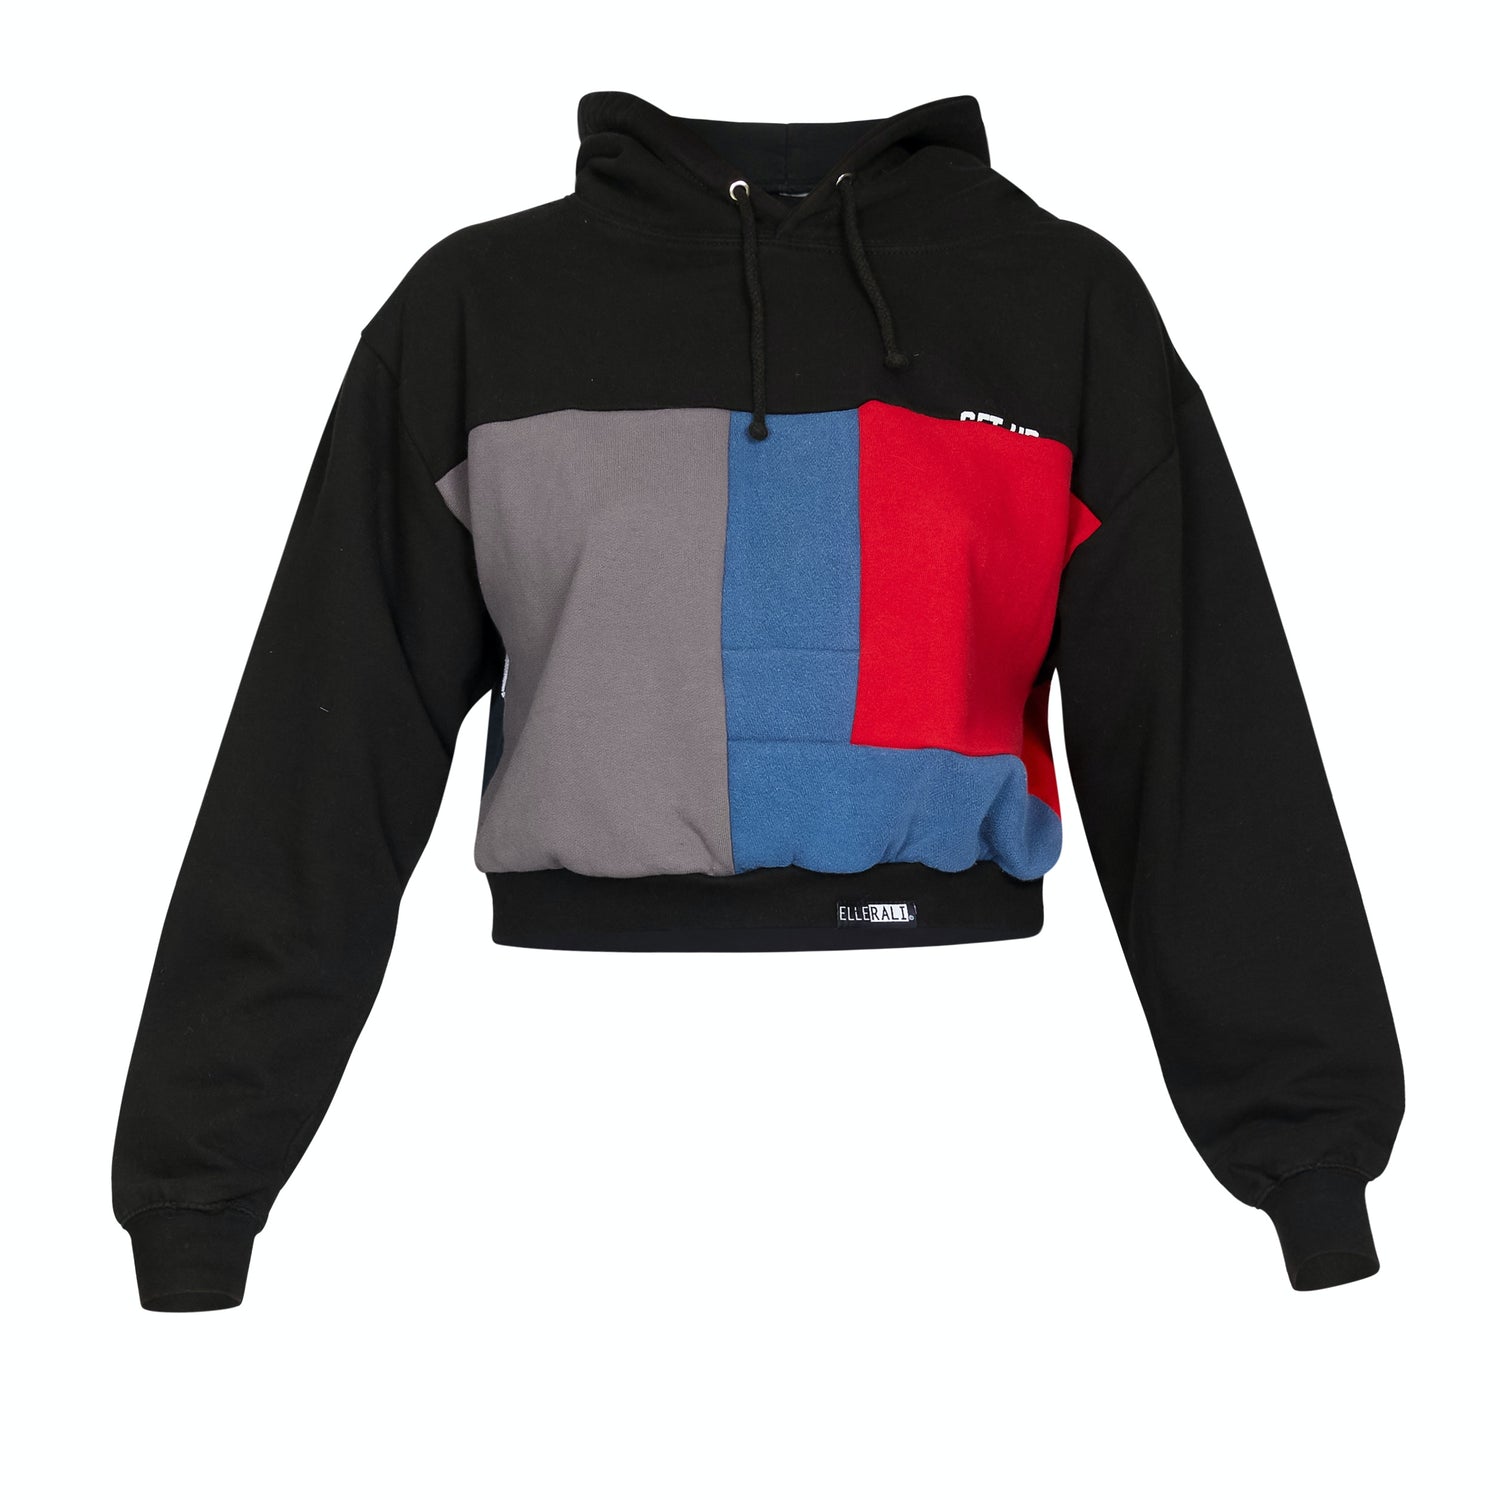 upcyled wom's crop hoodie with color blocking in red, blue, grey and black. 